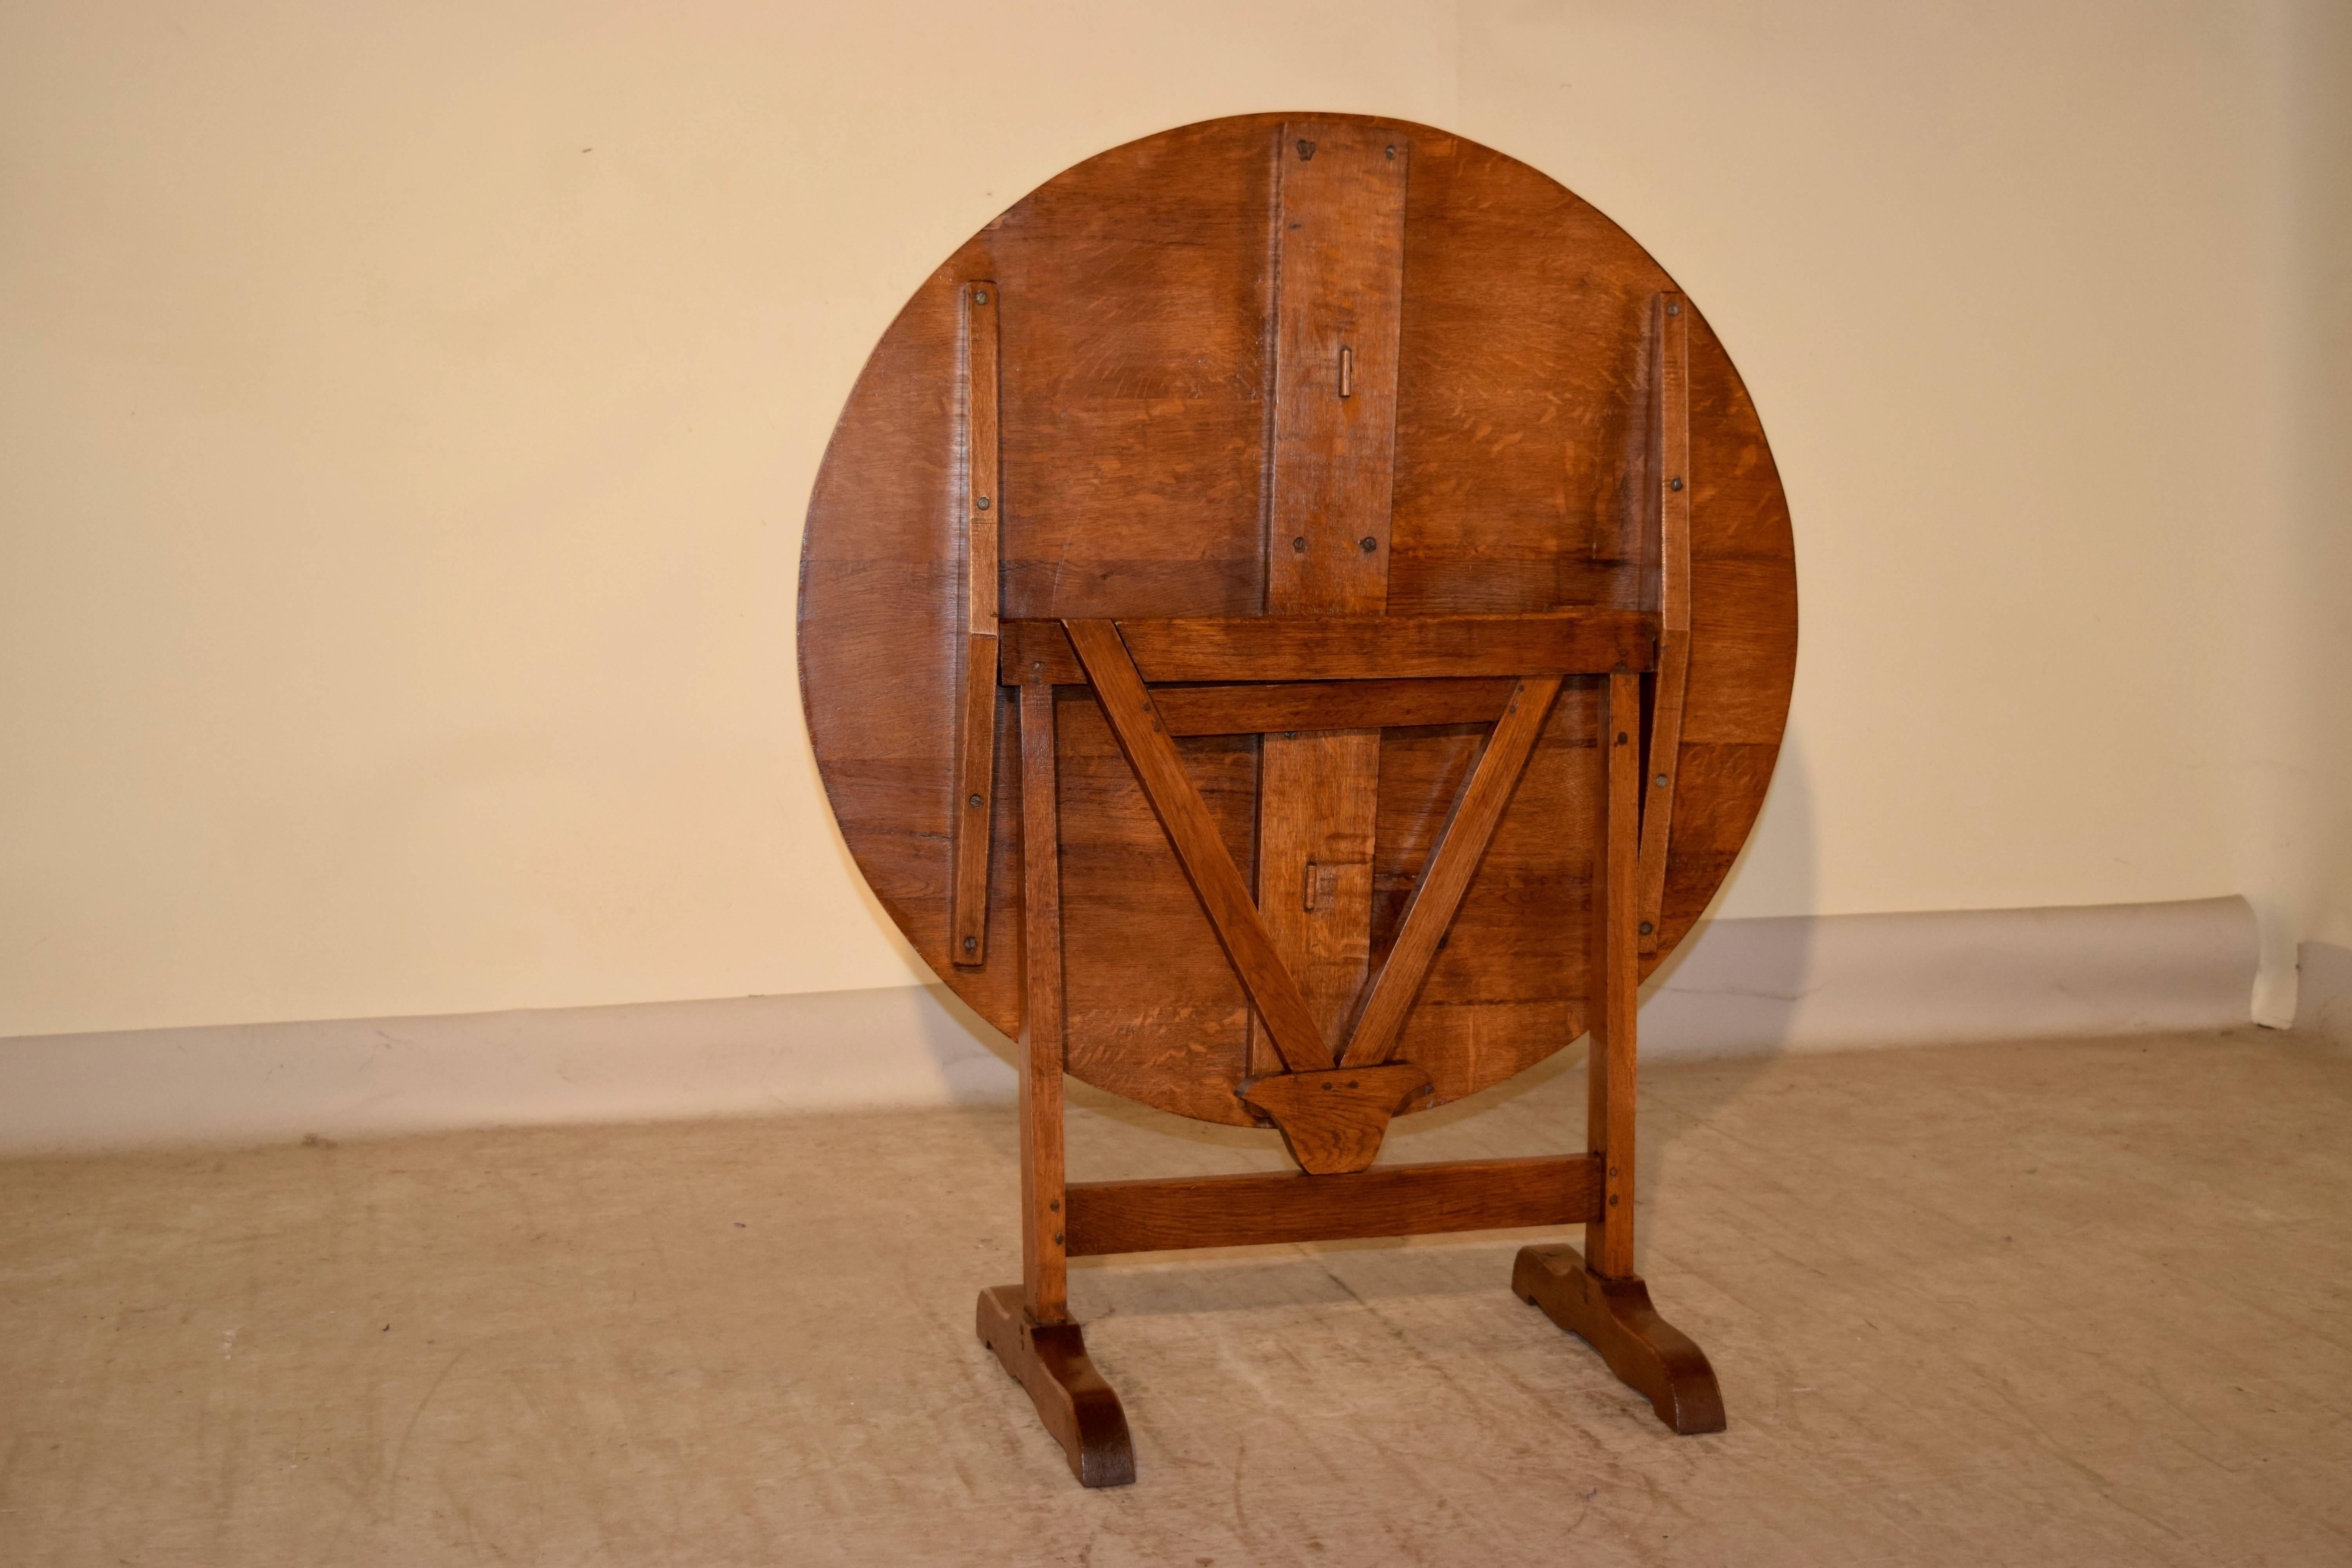 19th century French wine tasting table made from oak. The piece has simple stretchers and a simple trestle base, supported on shaped feet. The top open measures 35.5 x 35 x 28.25.